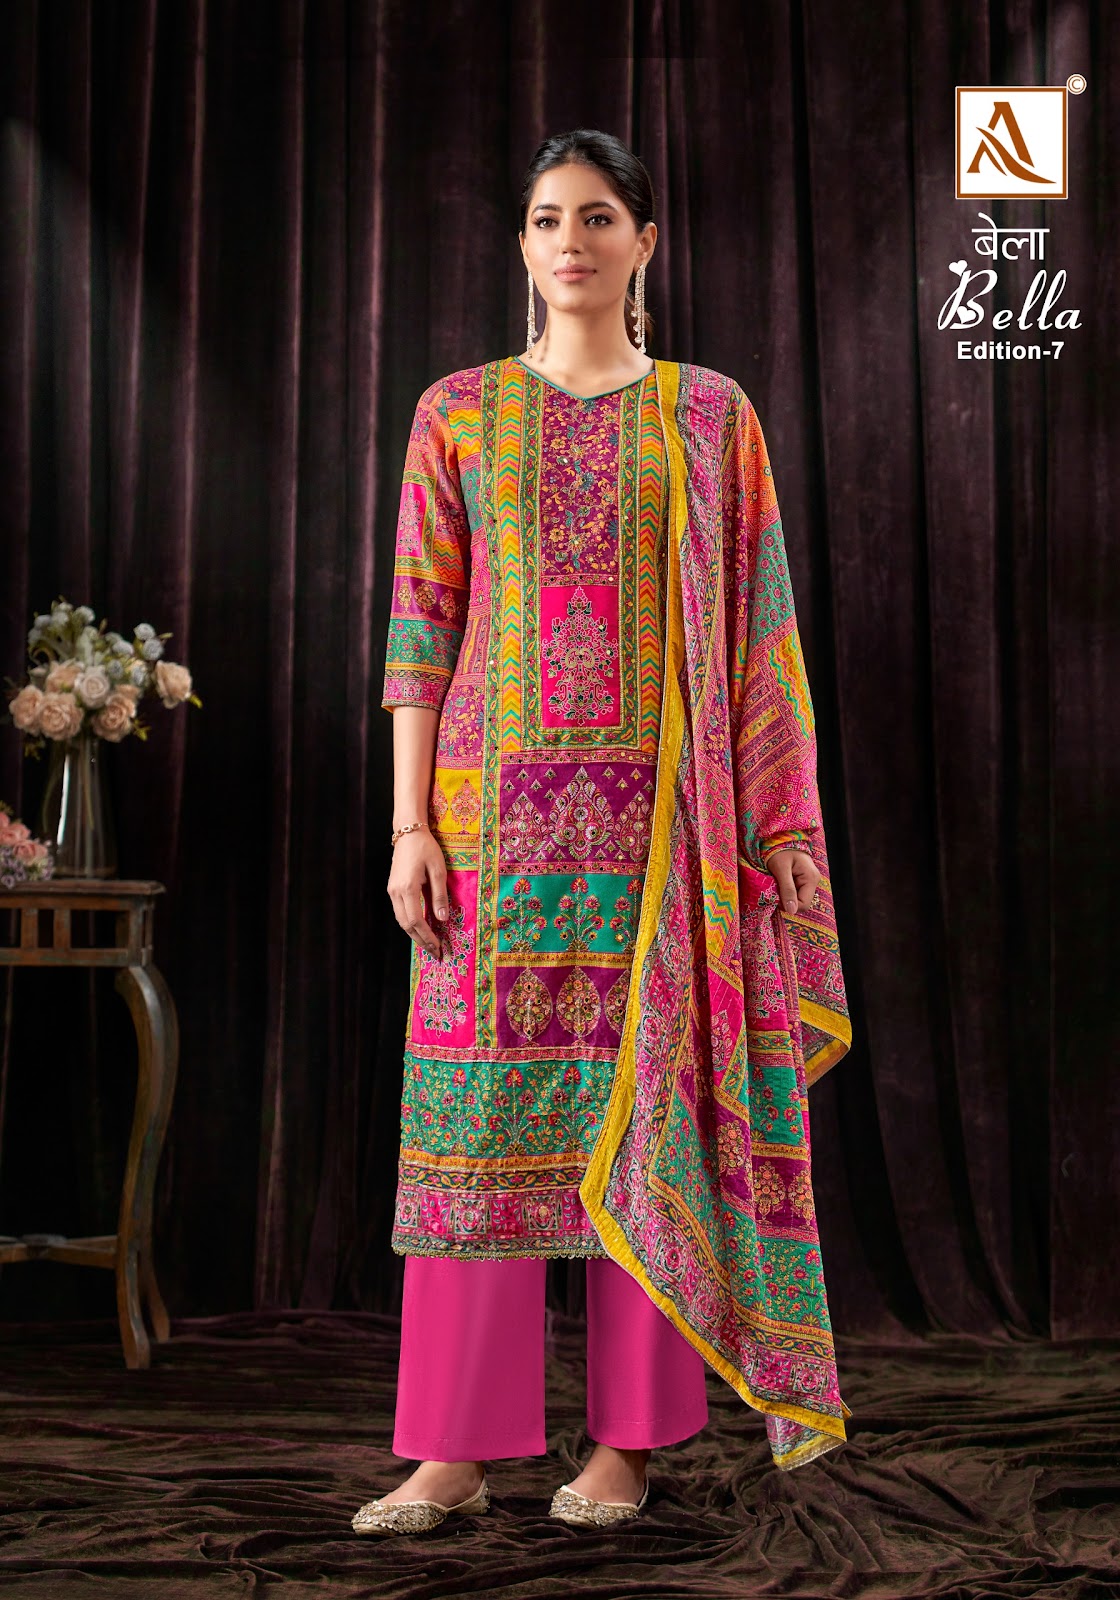 Bella Edition 7 Alok Pure Muslin Pant Style Suits Manufacturer Ahmedabad